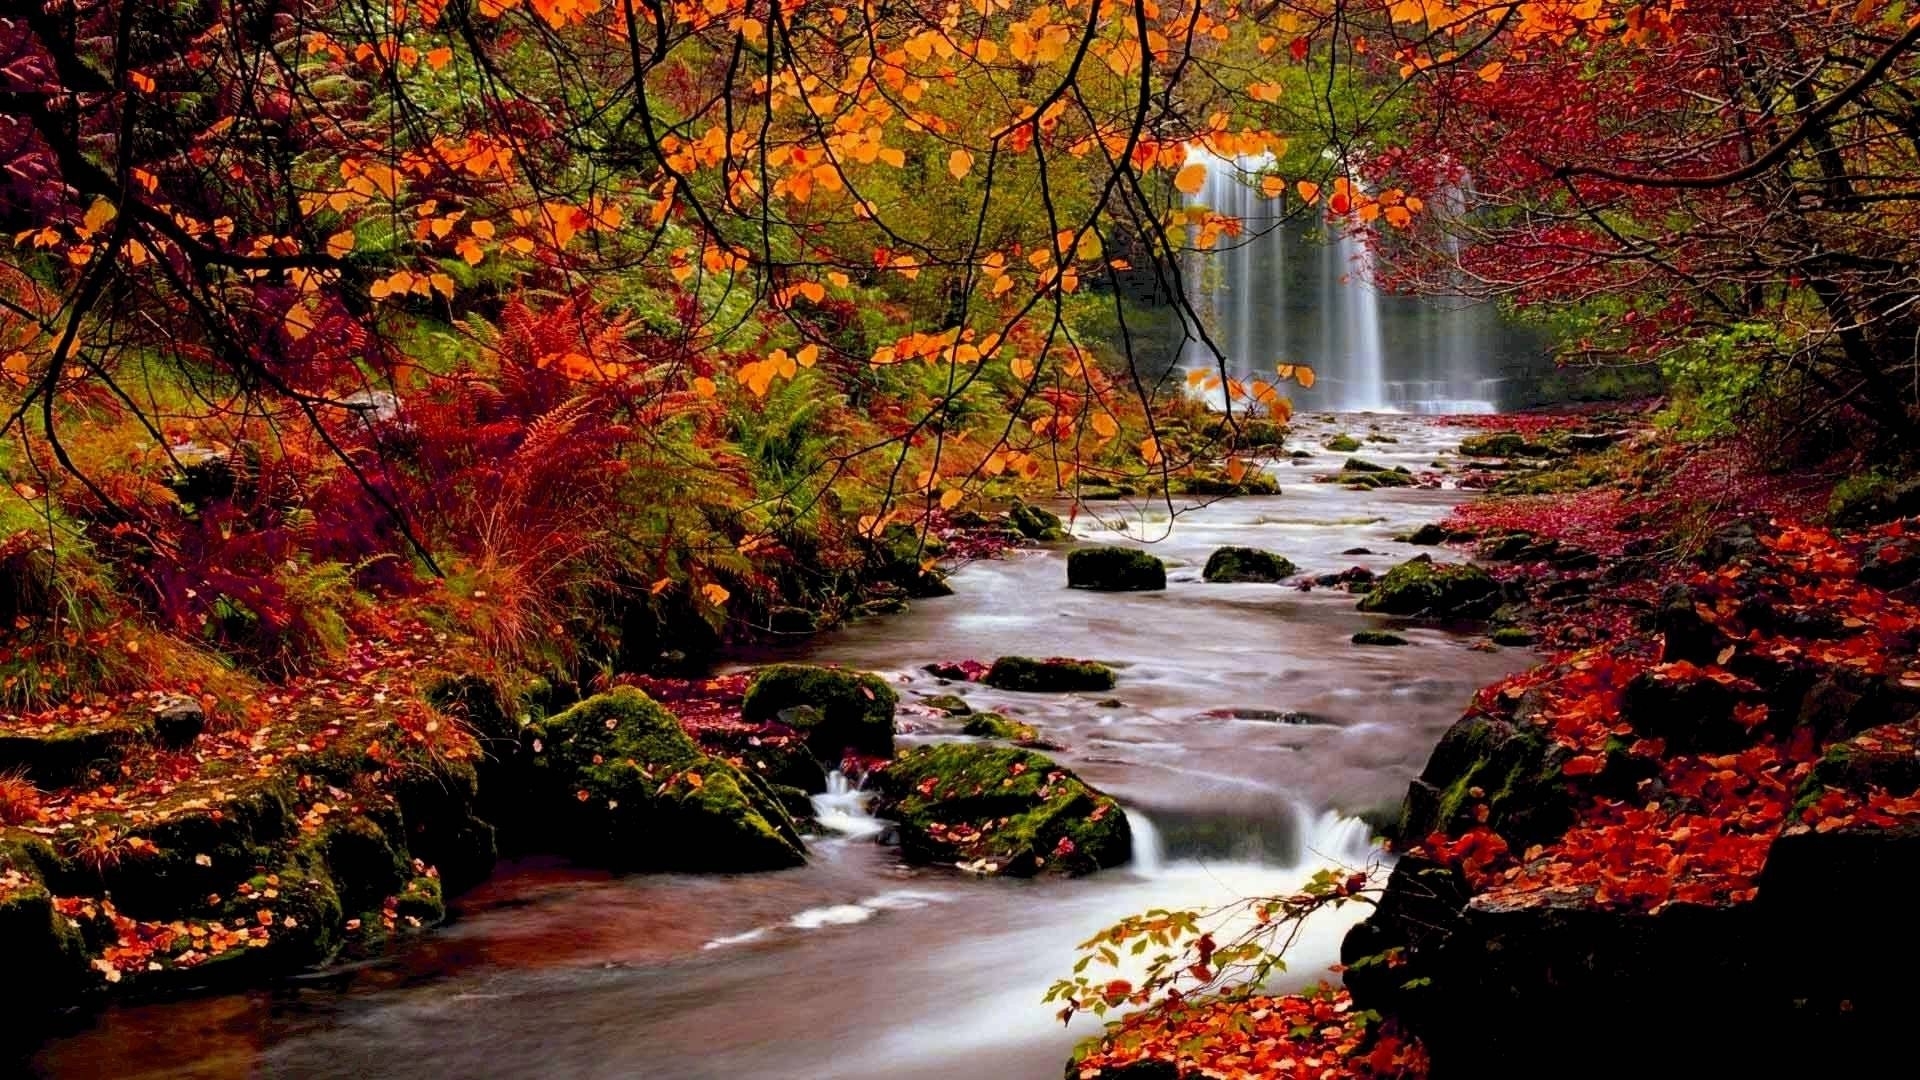 10 Top Images Of Fall Scenery FULL HD 1080p For PC Background 2021